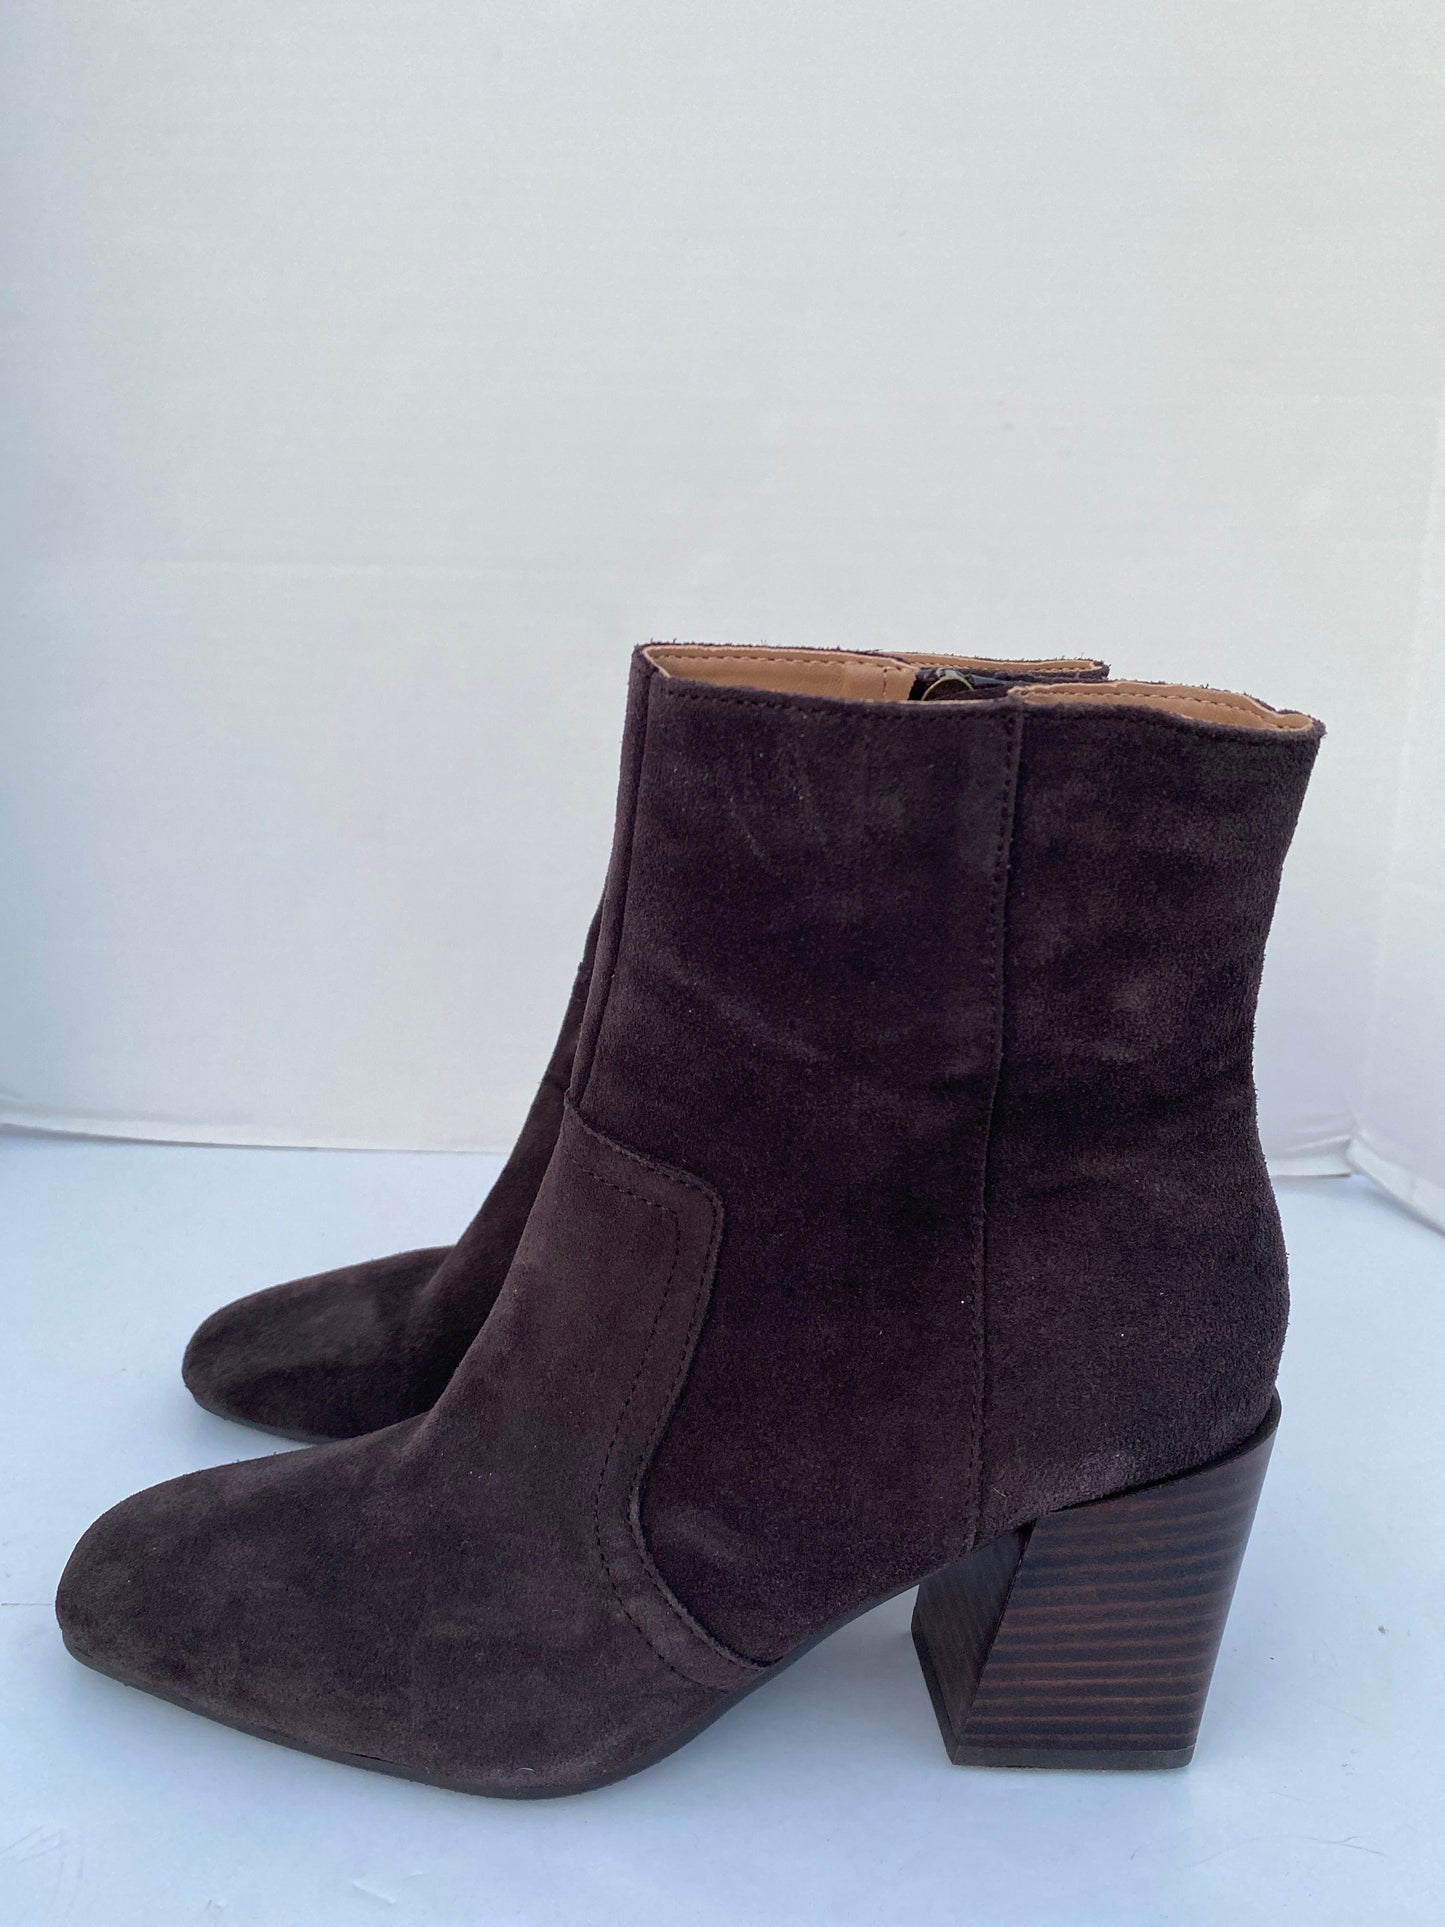 Grey Boots Ankle Heels Blondo, Size 7.5